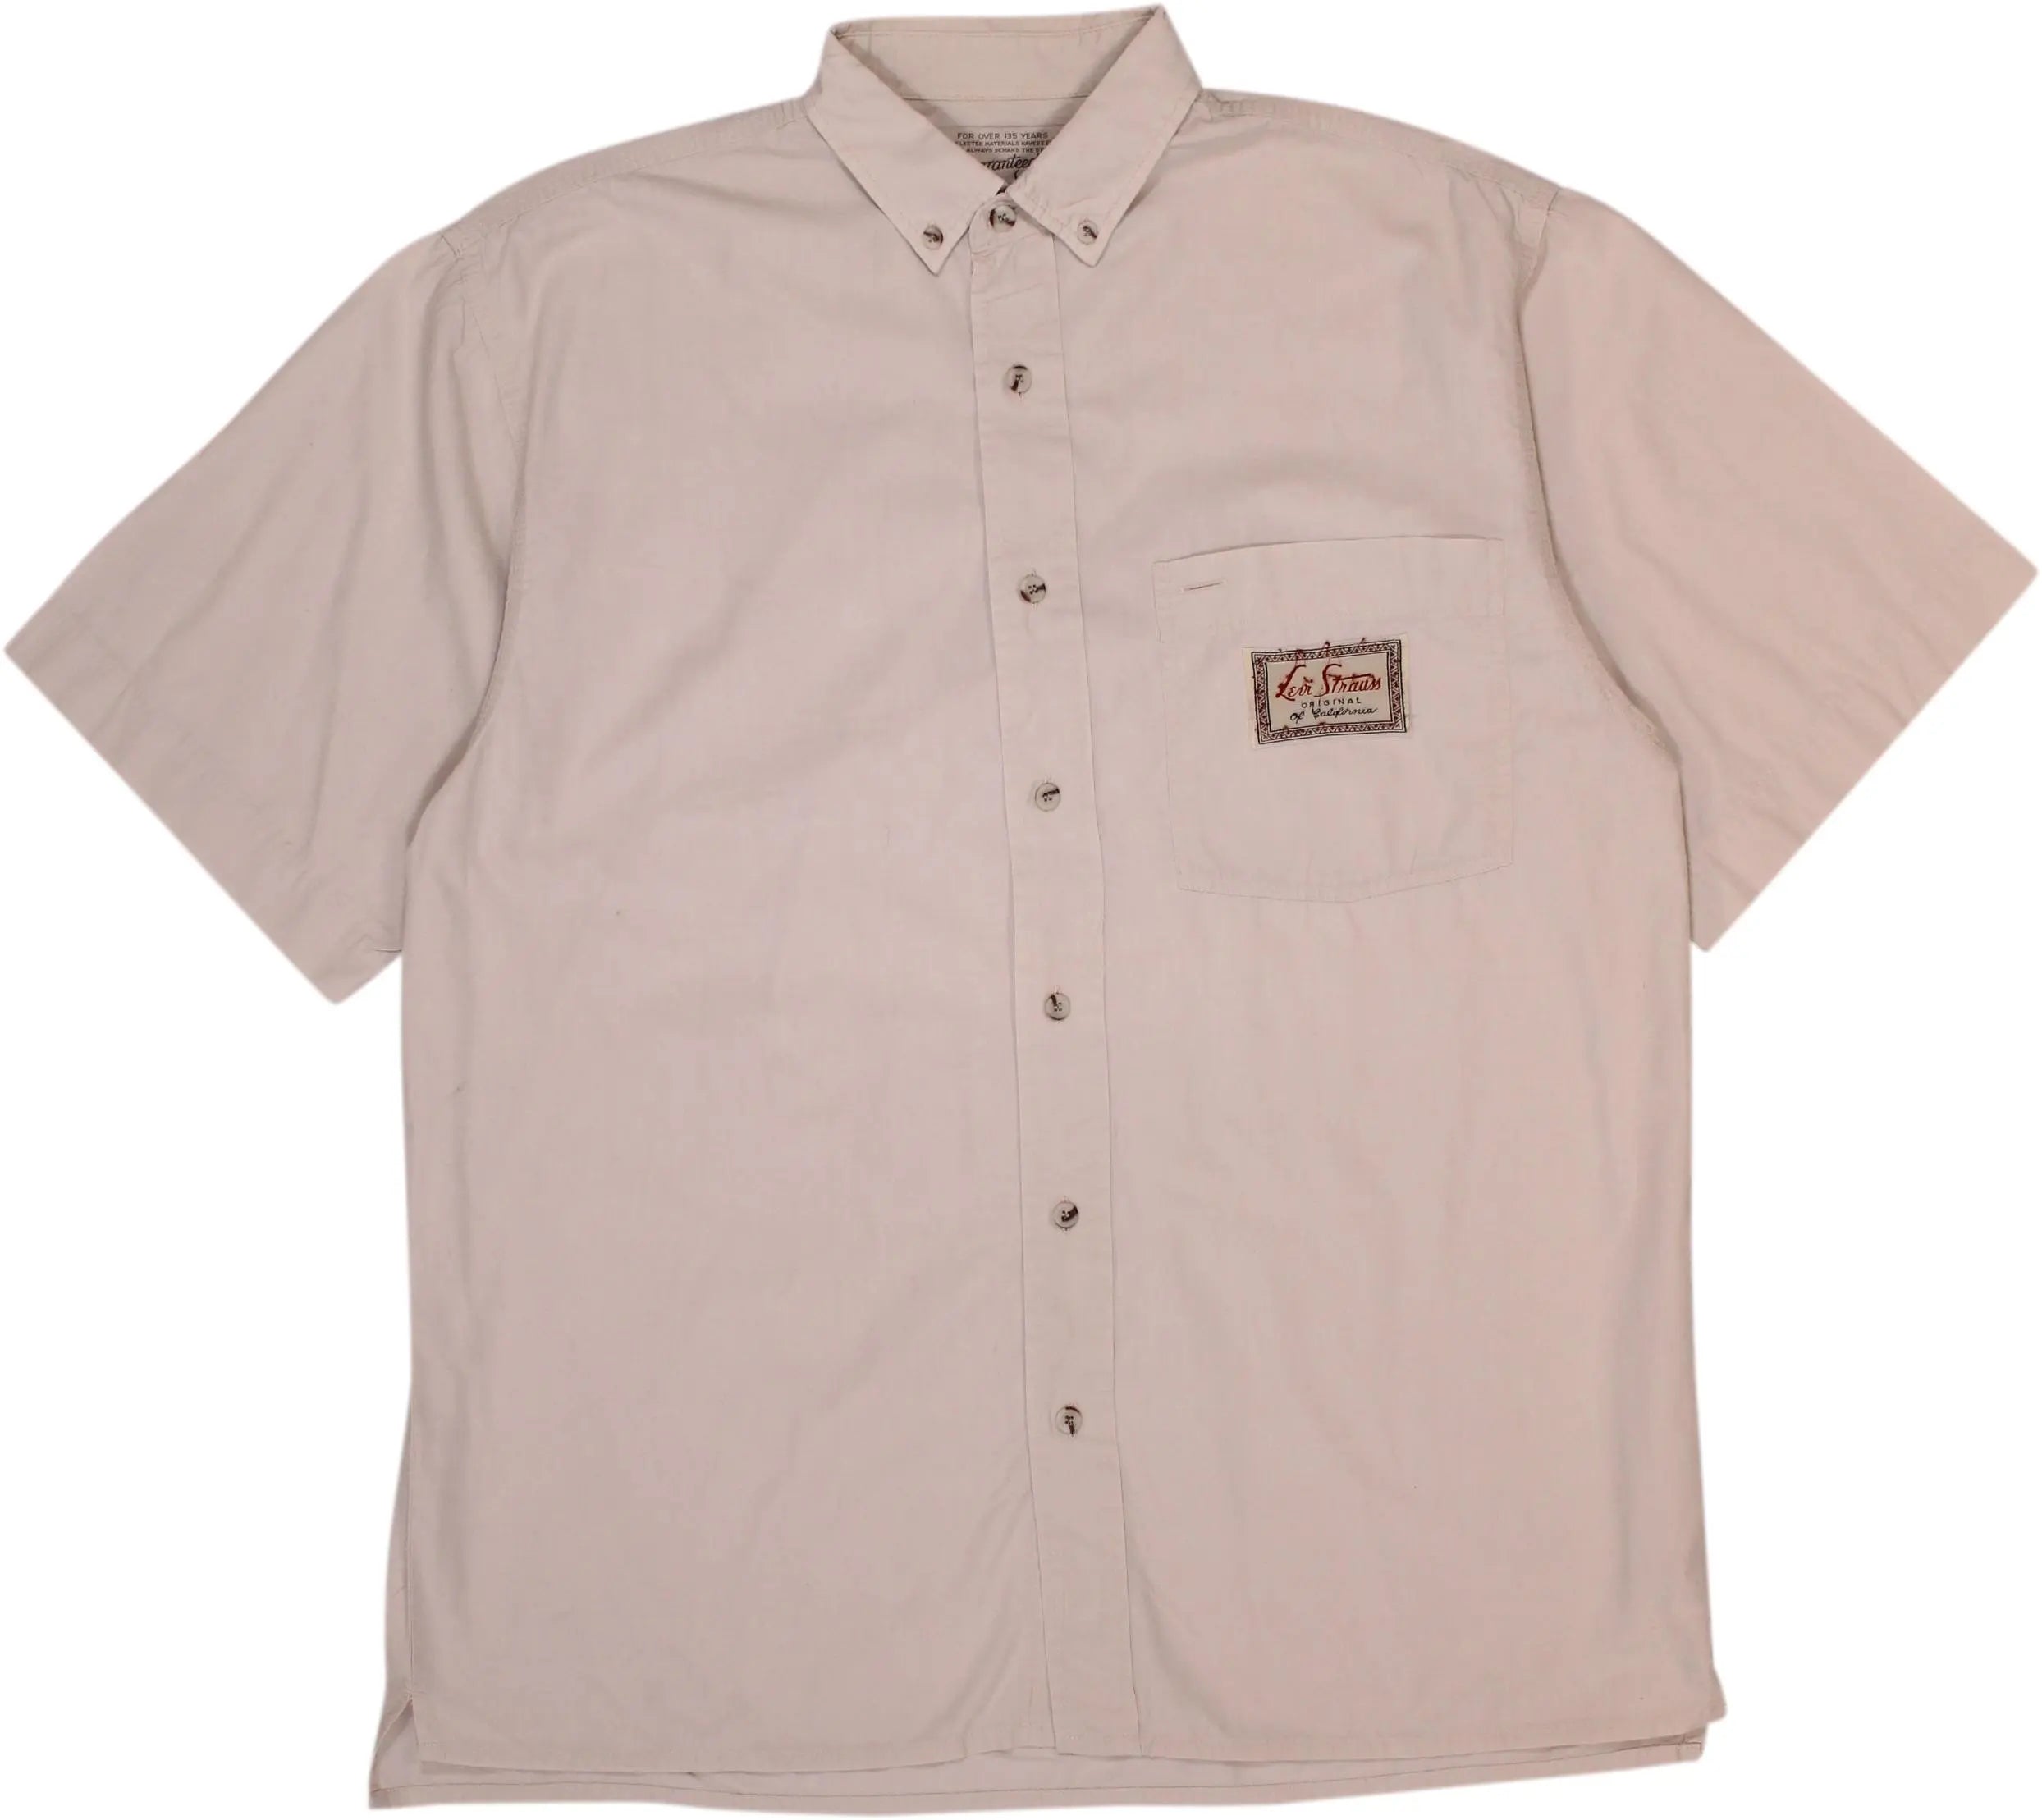 Levi's - Vintage Short Sleeve Shirt by Levi's- ThriftTale.com - Vintage and second handclothing